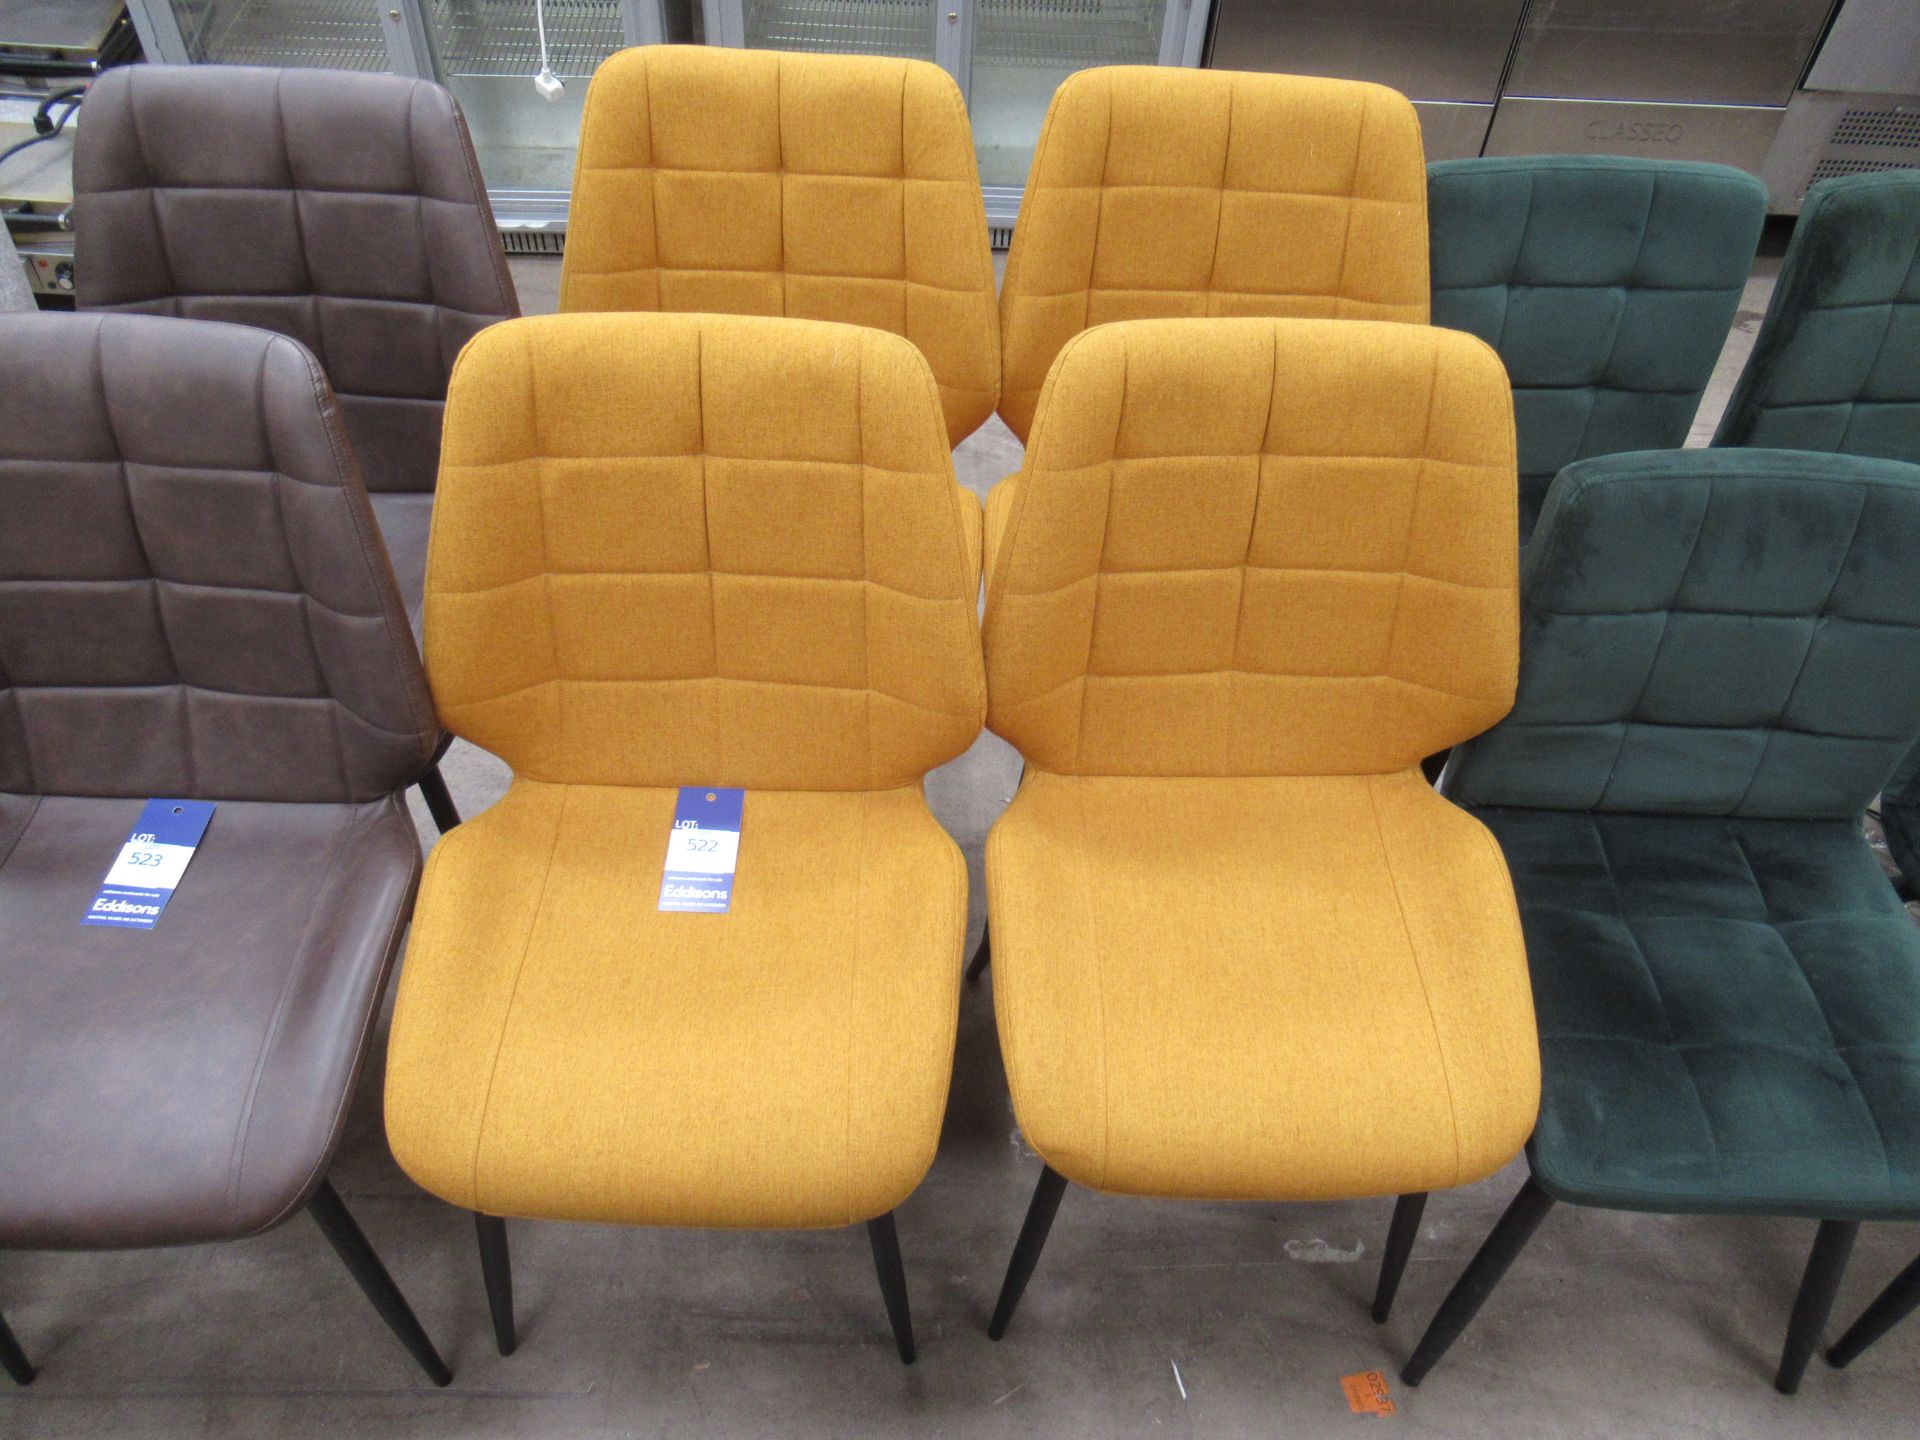 4x Yellow Upholstered Chairs